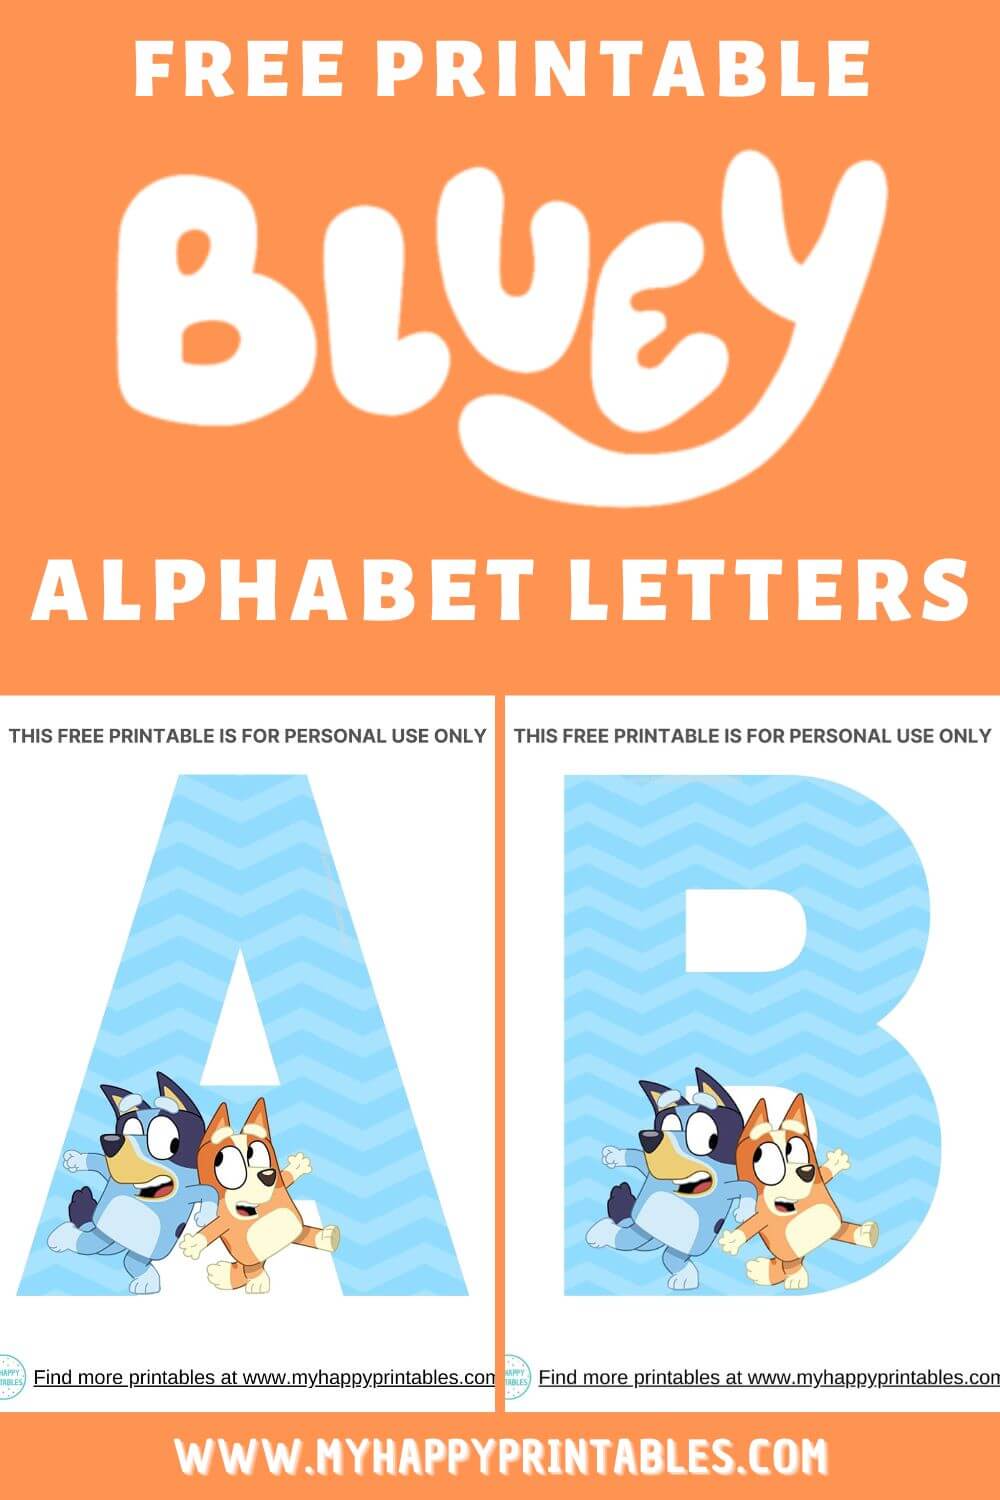 Printable Letters of the Alphabet - Cut out the letters